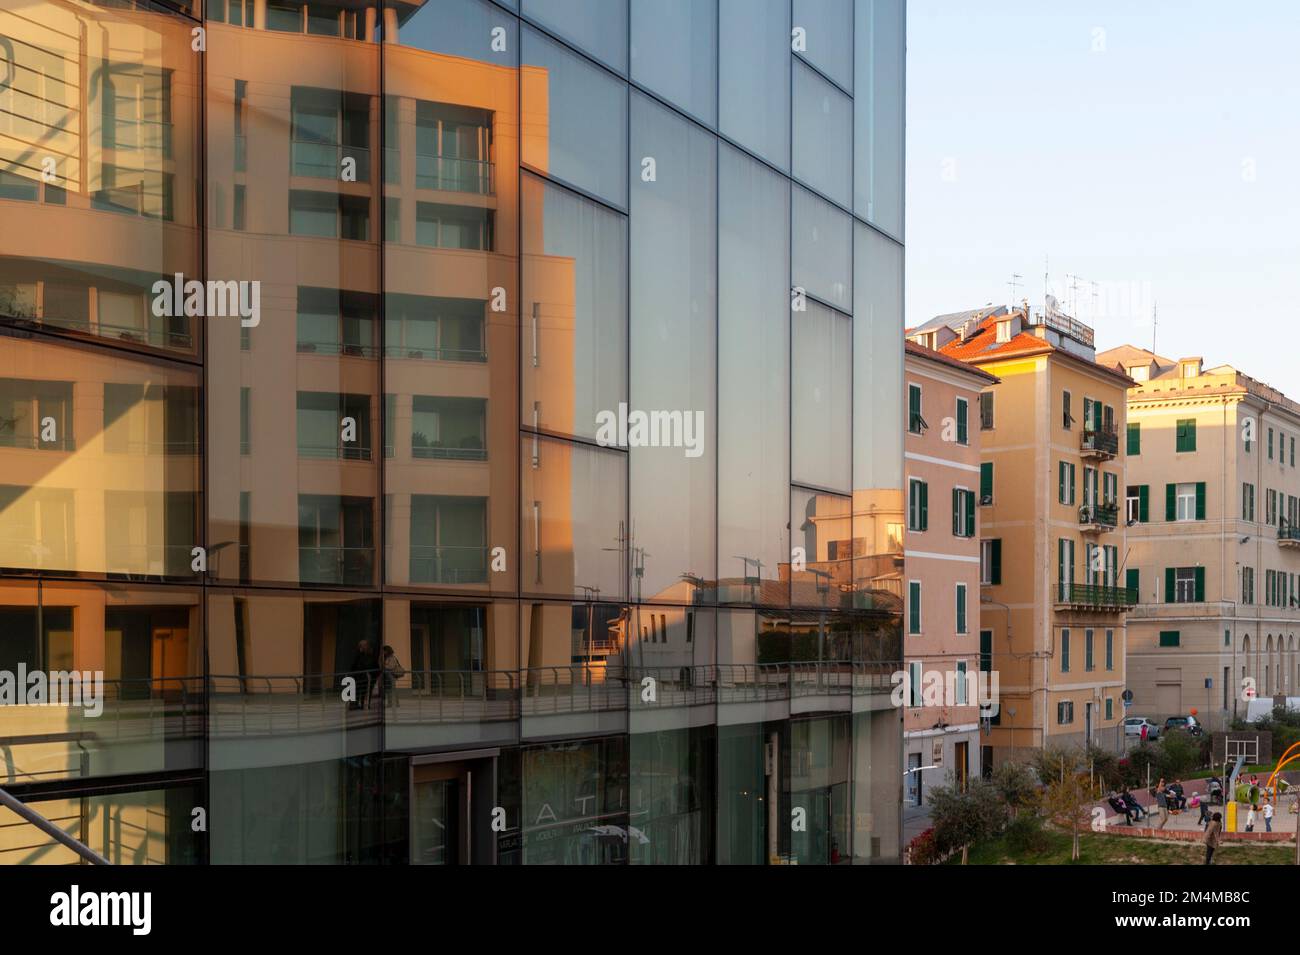 Italy, Savona. Panorama, view of the city of Savona in the Porto Nuovo area. Modern building and architecture. Stock Photo